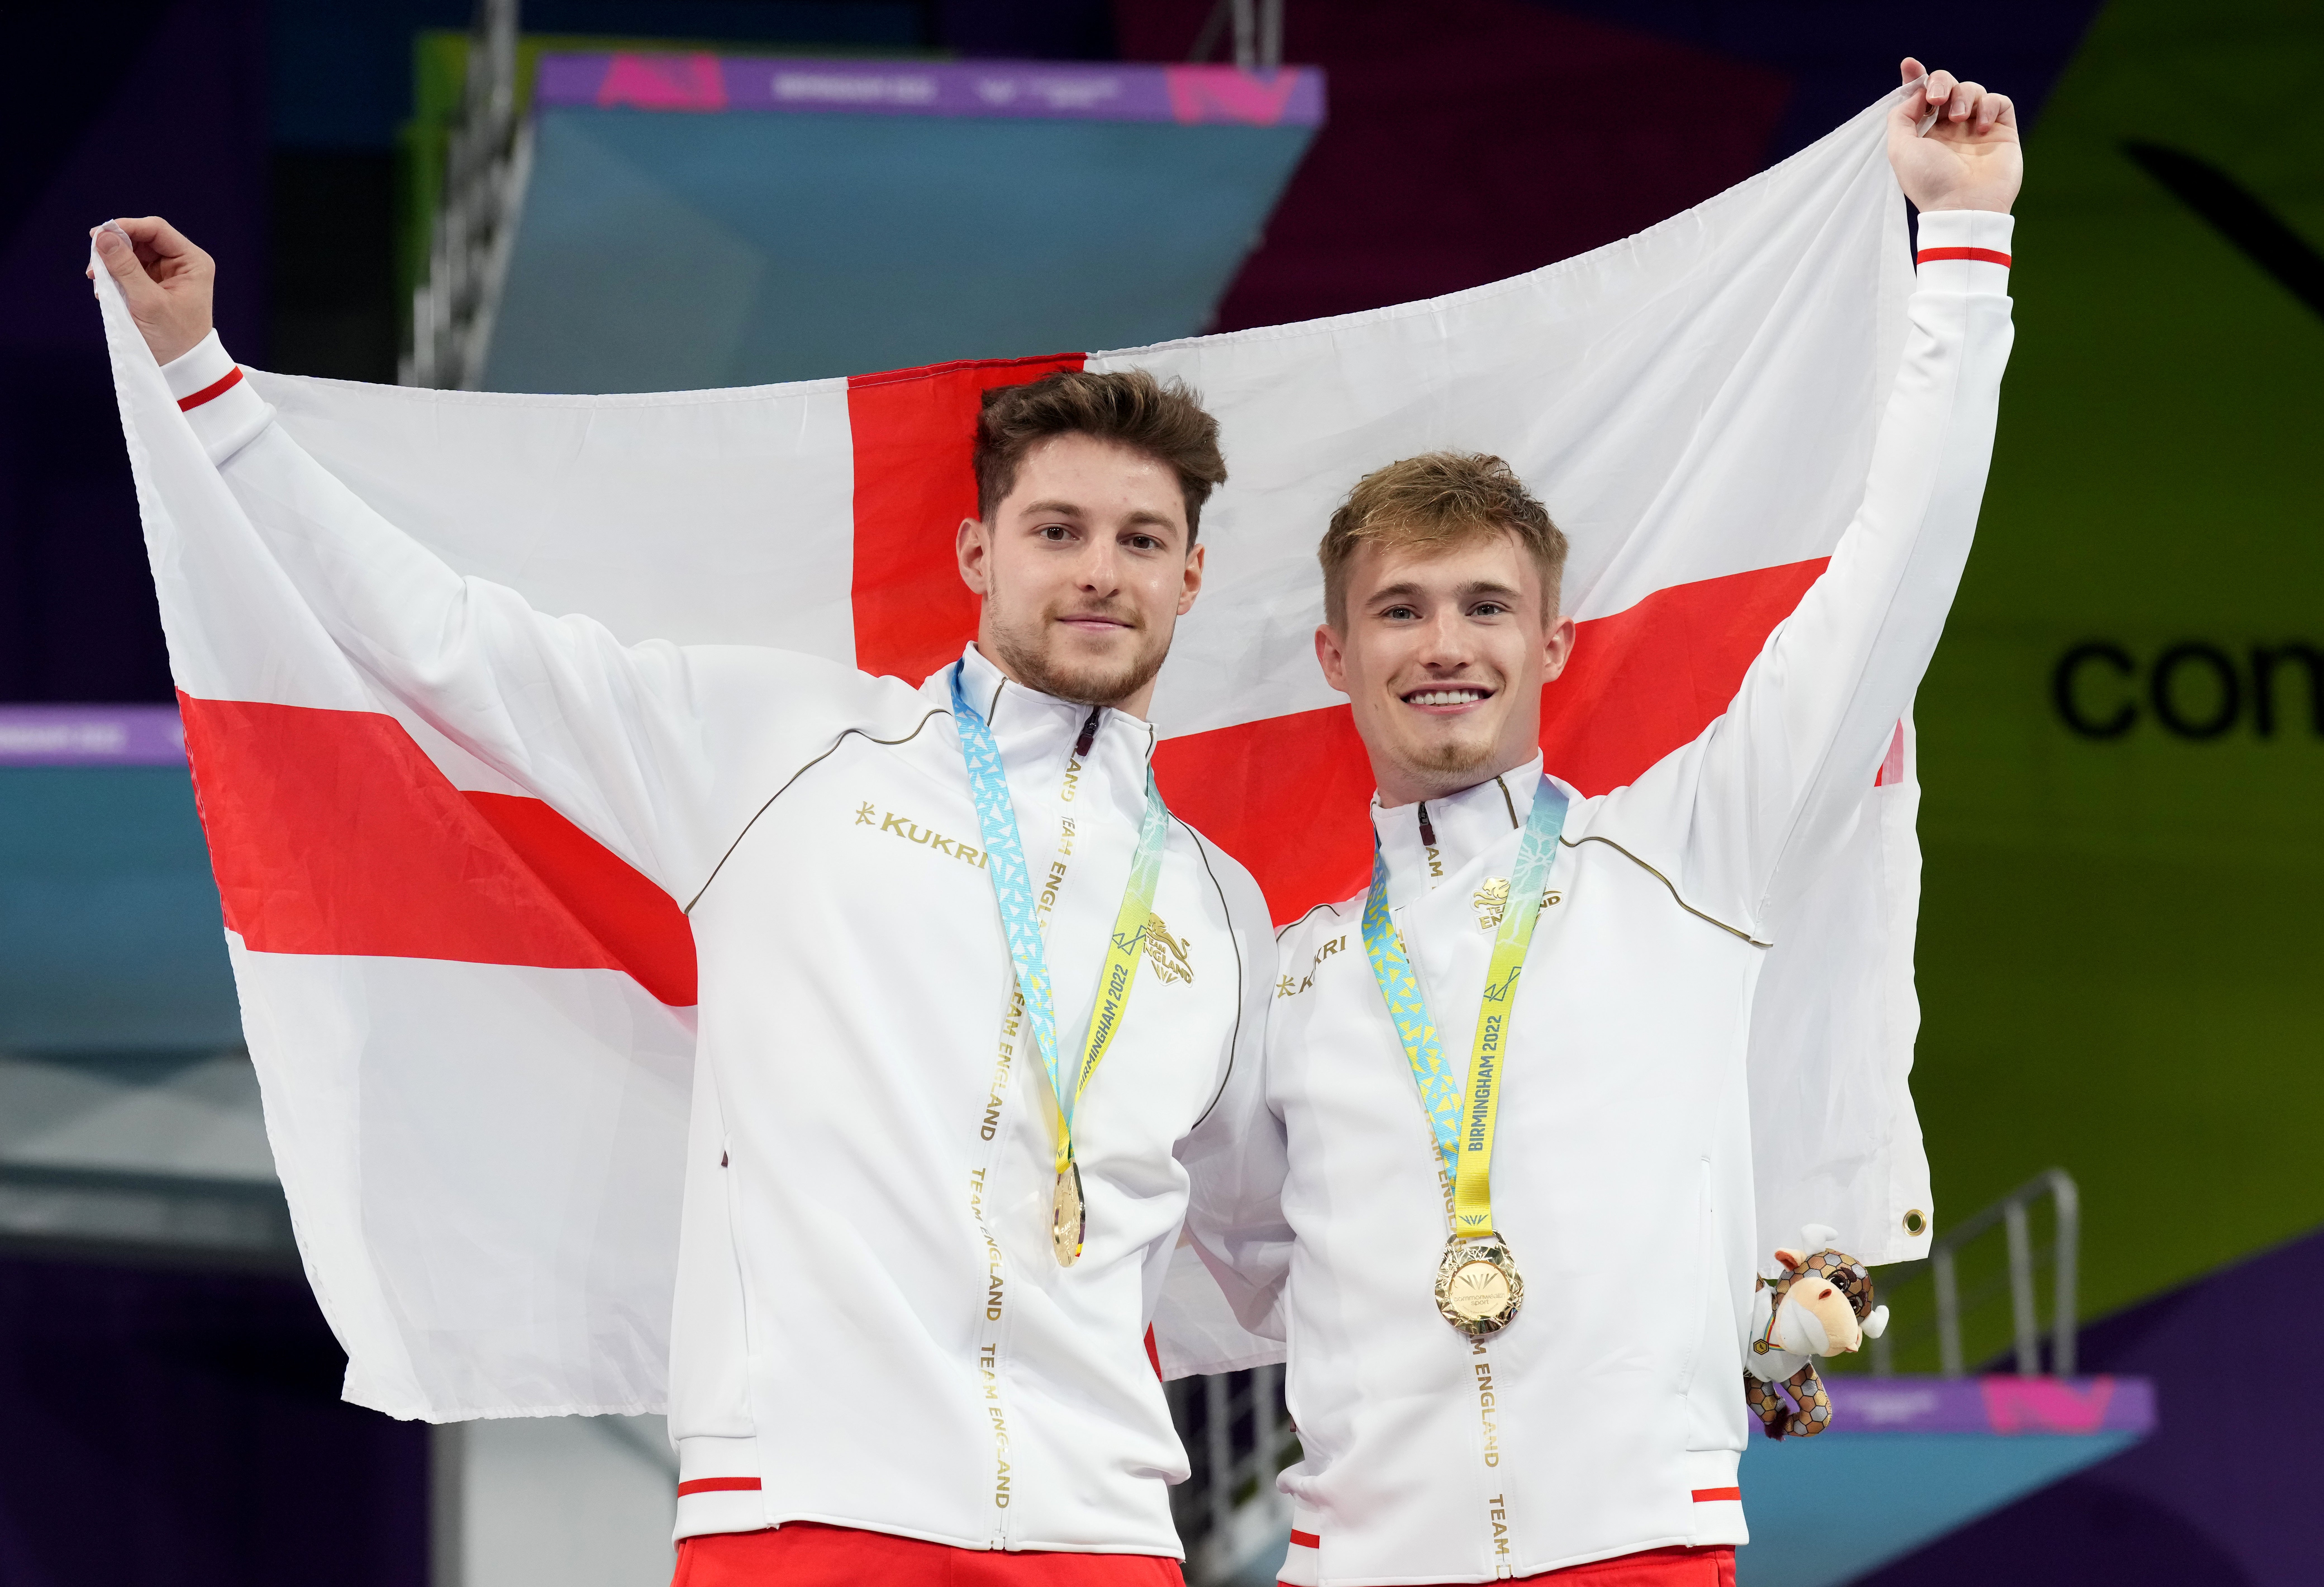 England’s Anthony Harding and Jack Laugher sealed gold in the synchronised 3m springboard final (Tim Goode/PA)